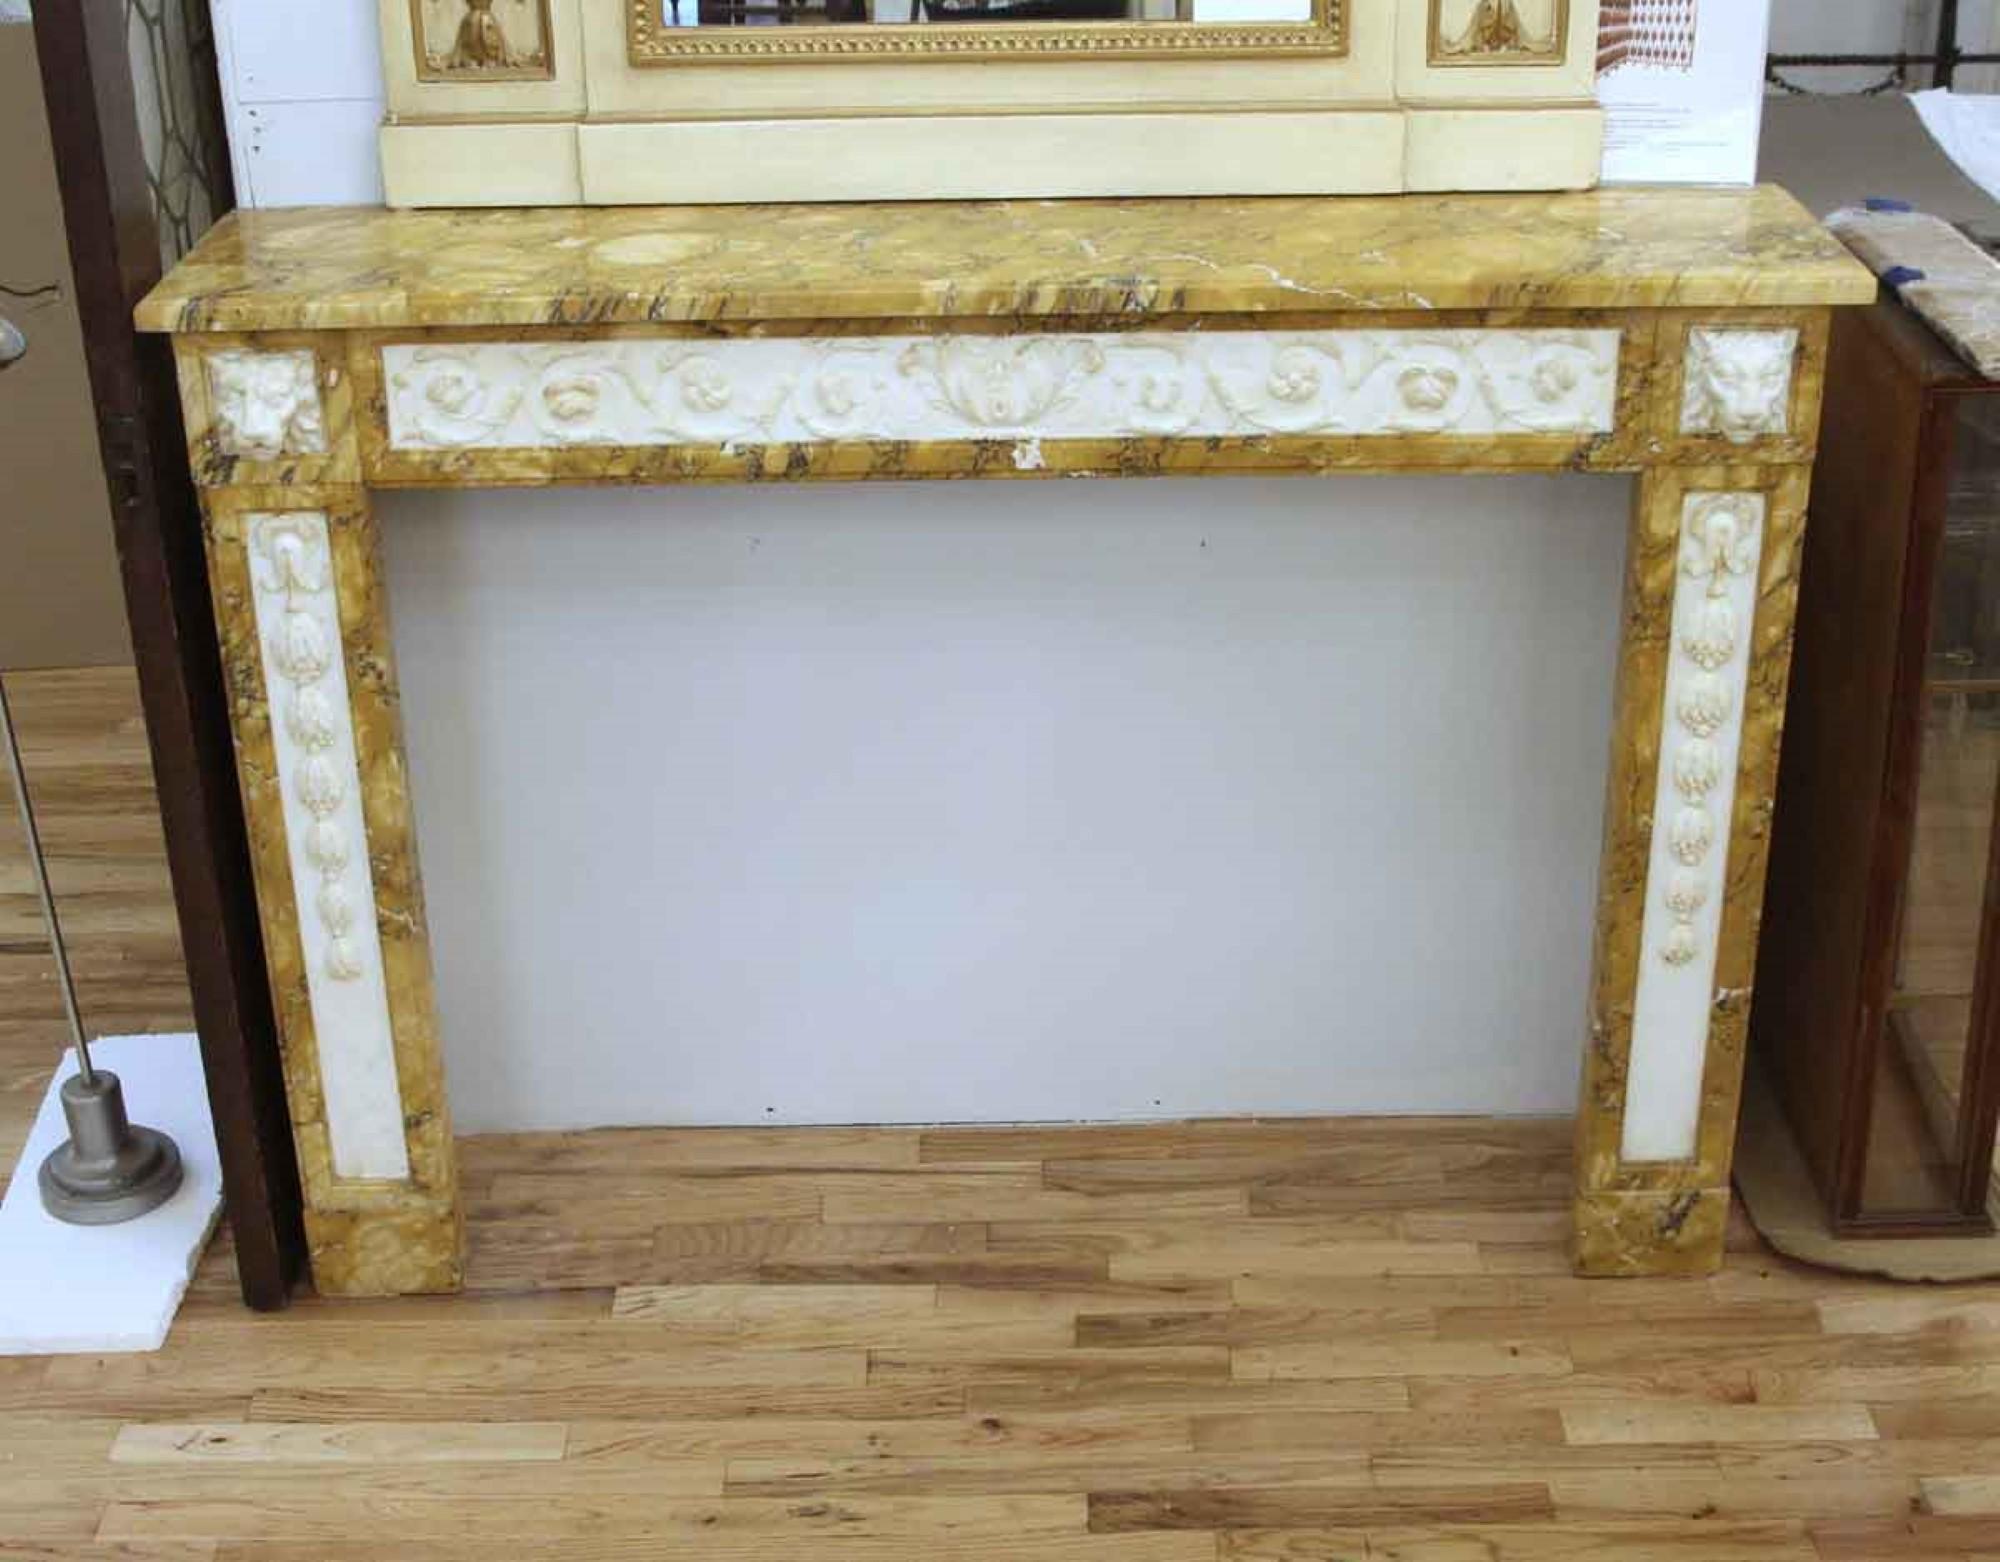 Early 20th century sienna marble Victorian mantel featuring white statuary inlaid panels. Hand carved highly detailed floral carvings. Each column top features highly carved lion heads. Matching sienna hearth not pictured. This can be seen at our